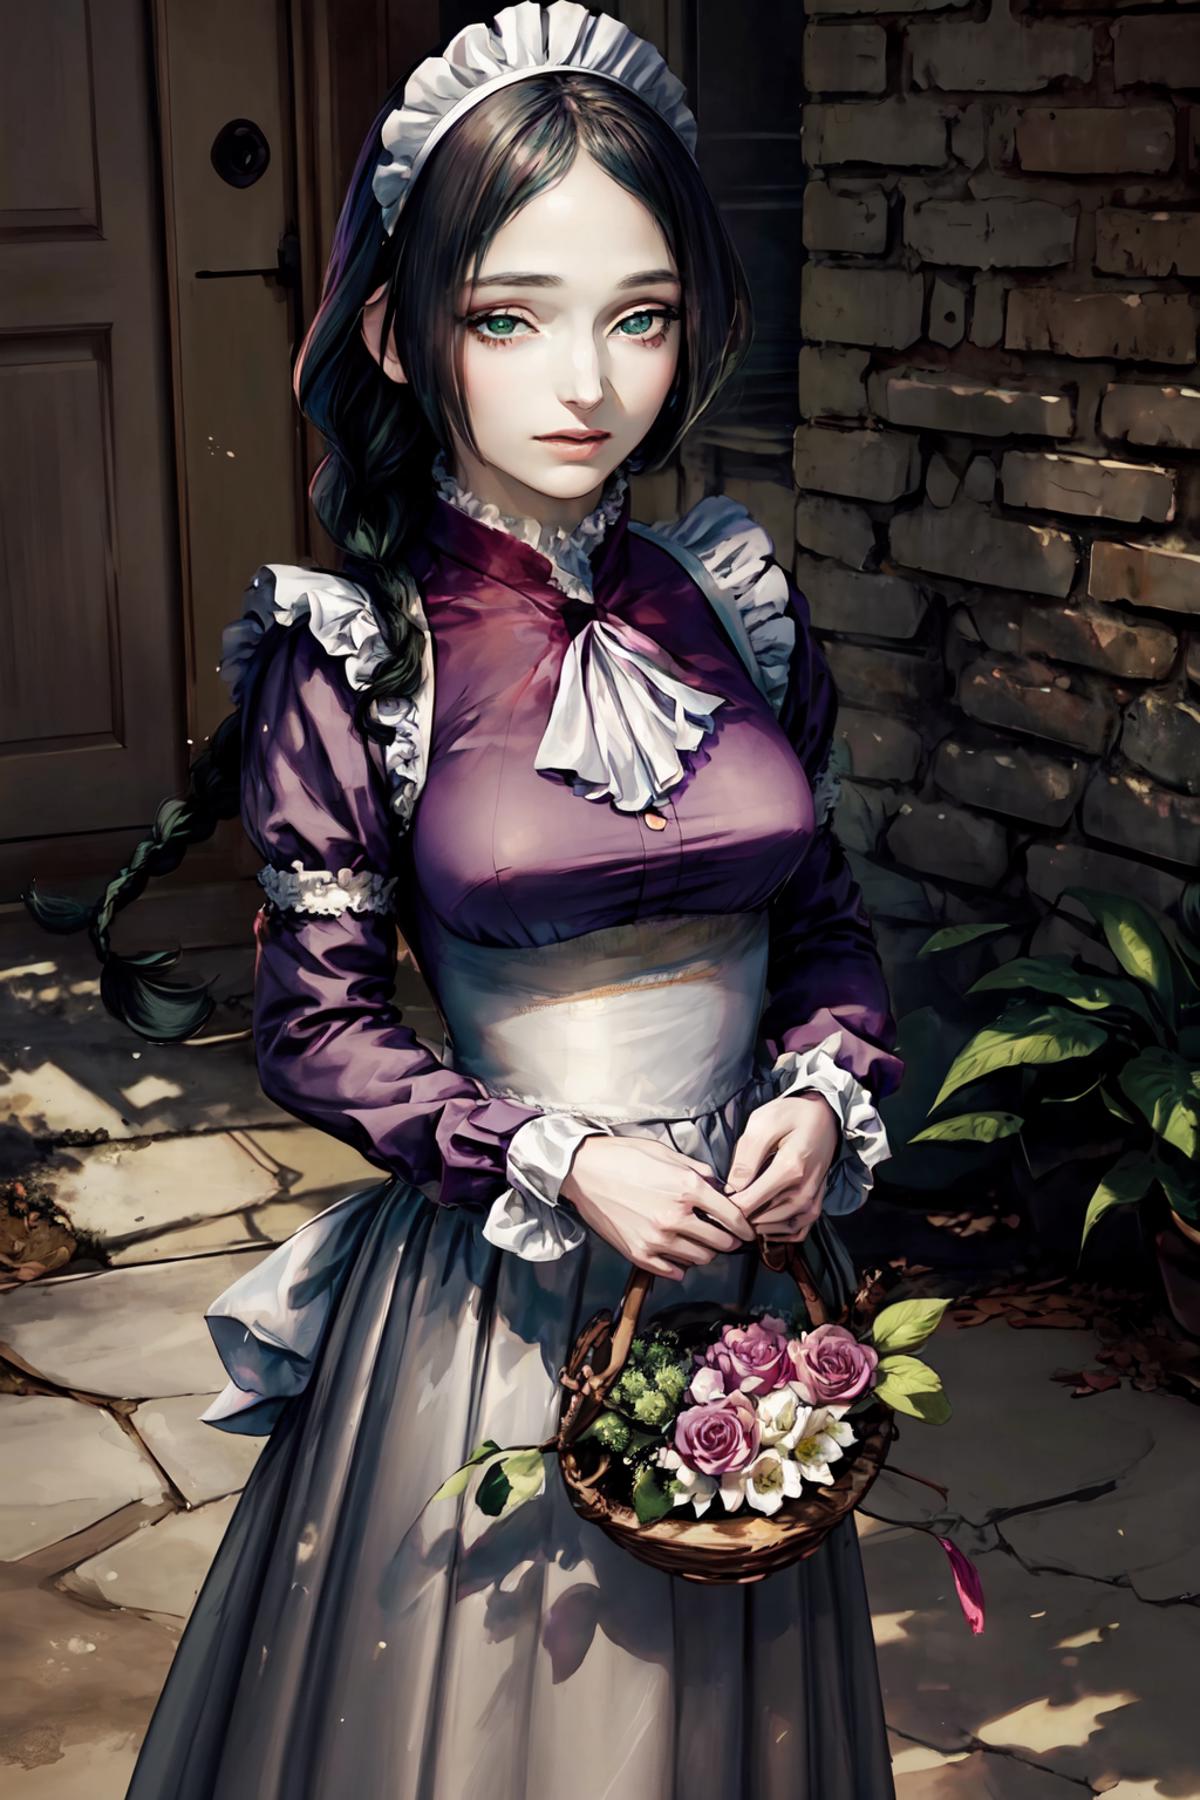 Giselle (The House in Fata Morgana) image by SOSDAN